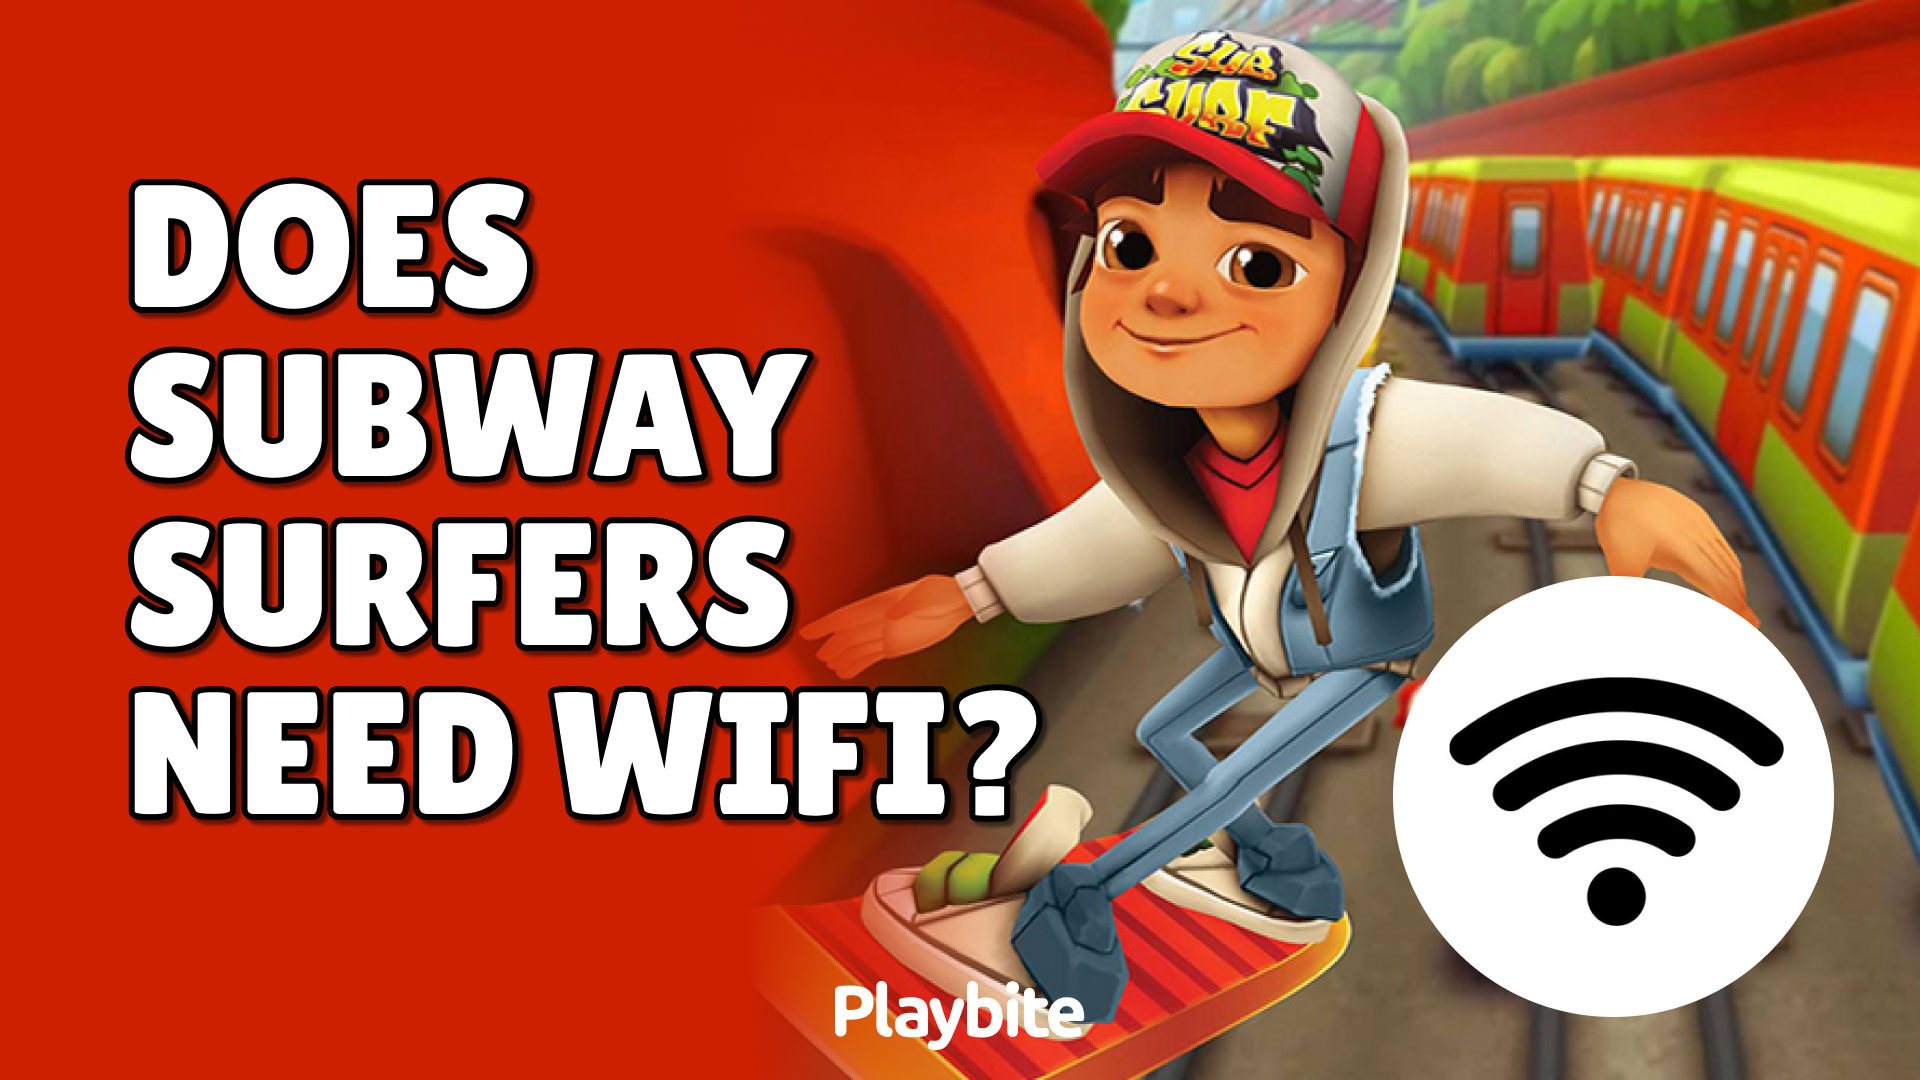 When Did Subway Surfers Come Out? - Playbite